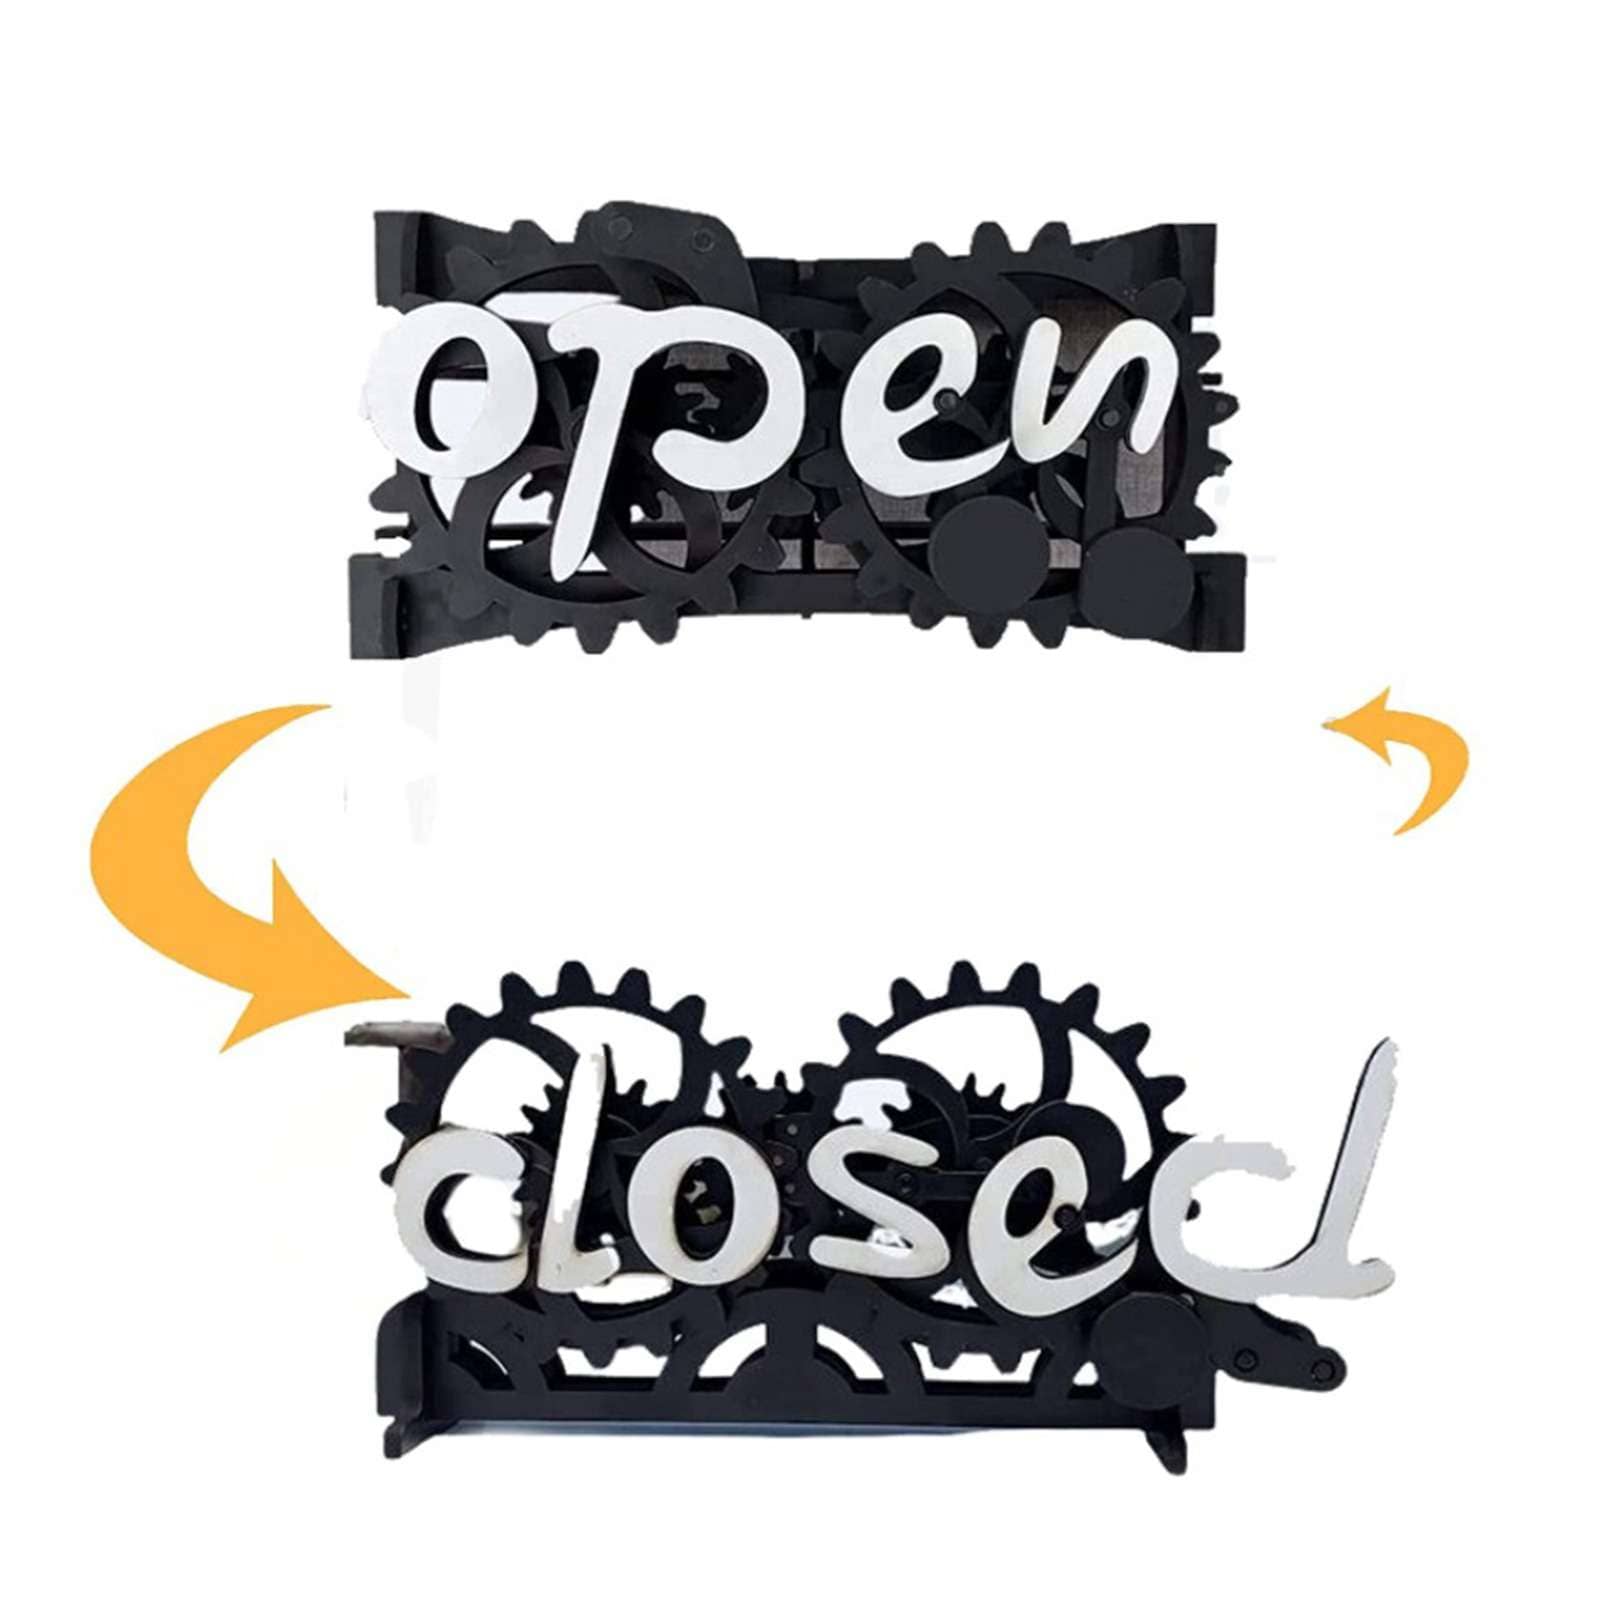 Wooden Double-sided Open/Closed Sign Signs Reversible Gear Business Closing Sign Shop Plaques Billboard Home Decor Ornaments